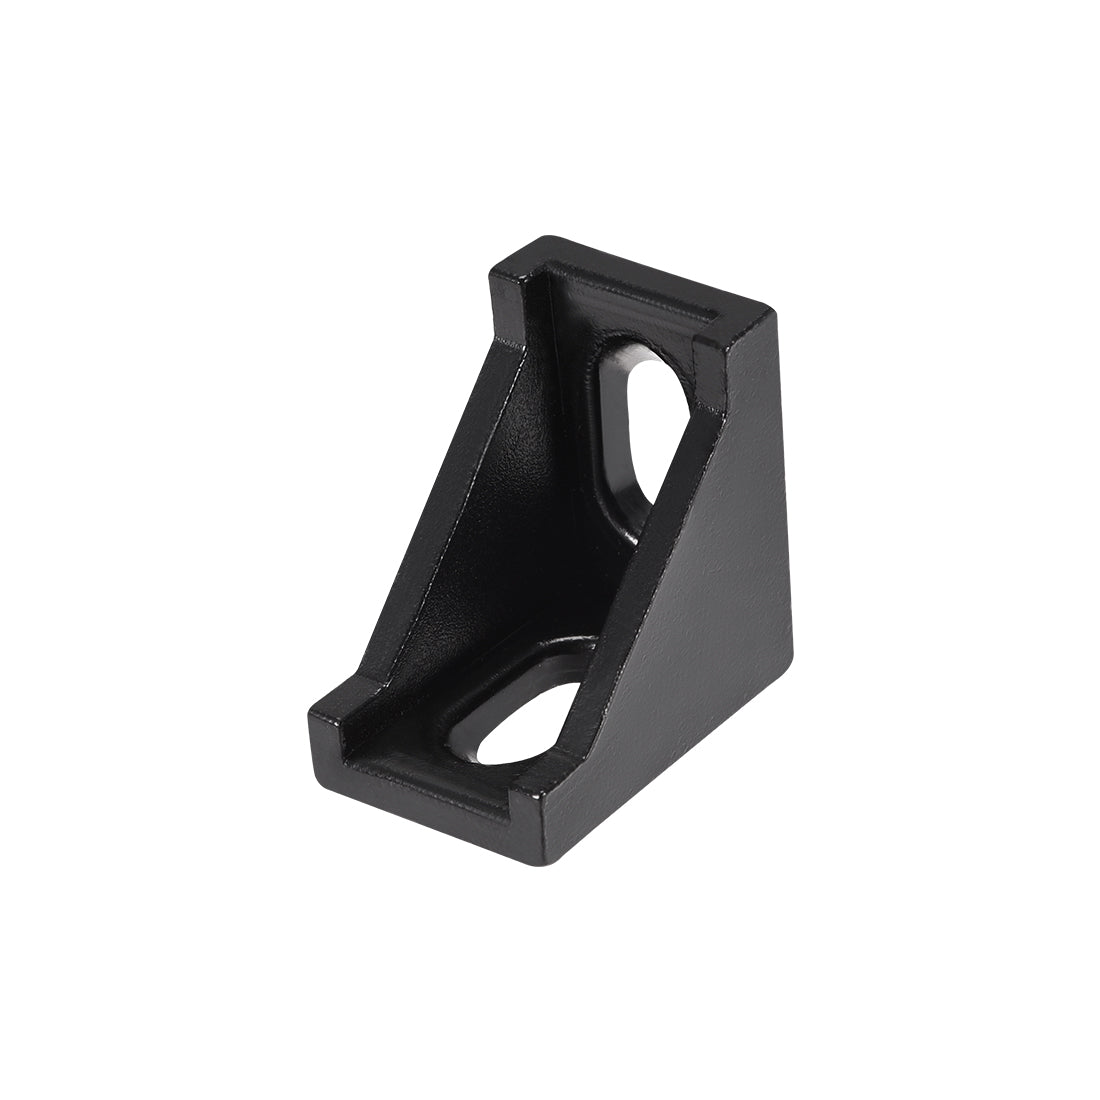 uxcell Uxcell Inside Corner Bracket Gusset, 28mm x 28mm for 2020 Series Aluminum Extrusion Profile with Slot 6mm, 20 Pcs (Black)